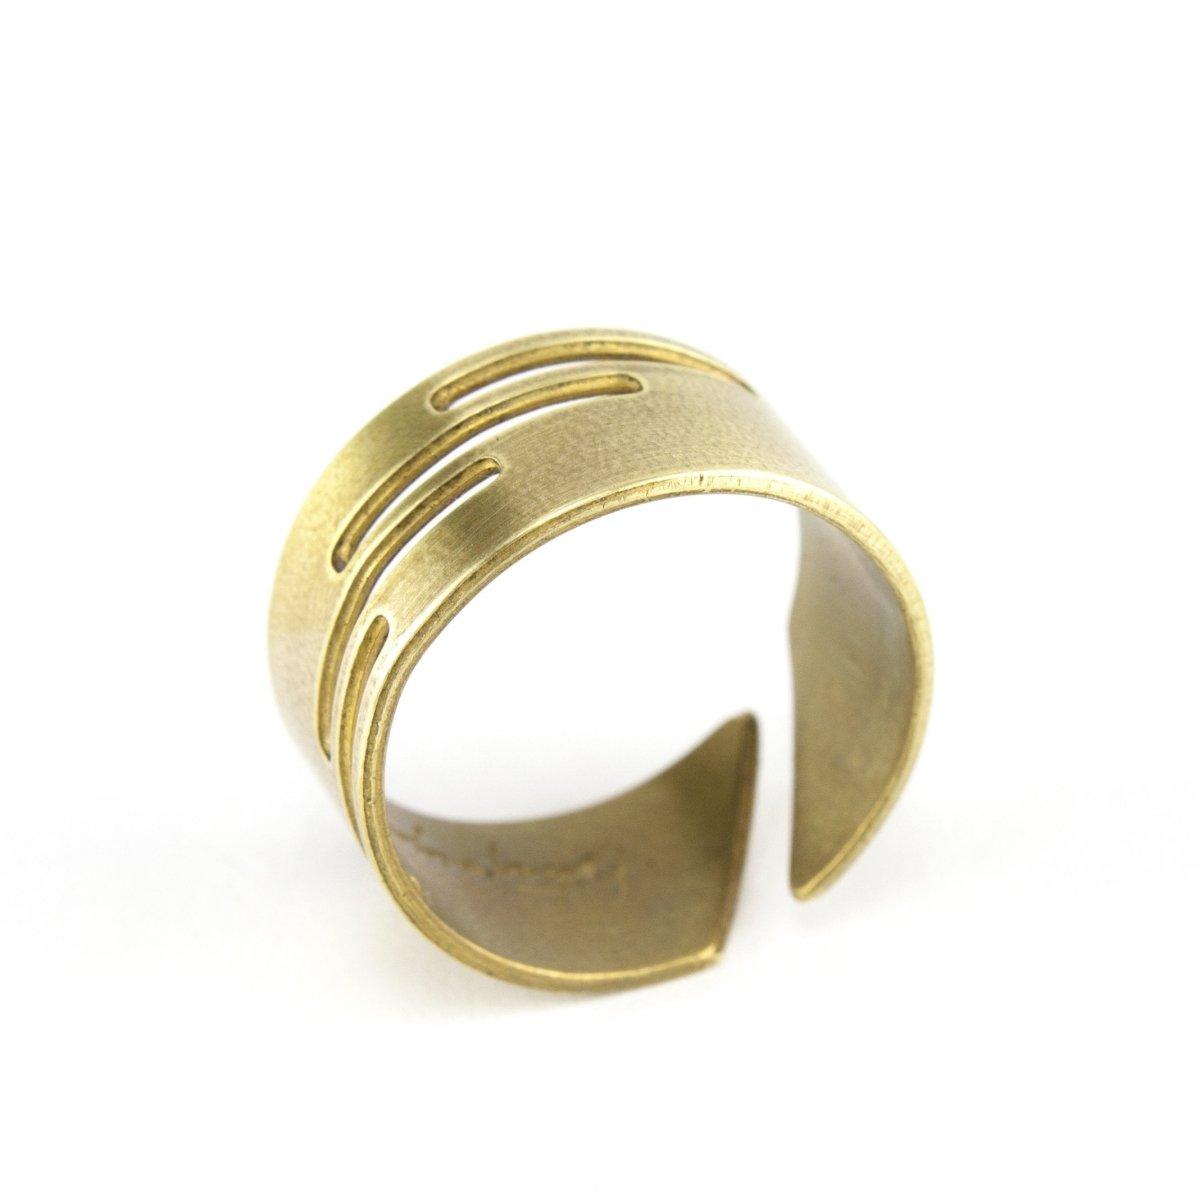 Adjustable, brushed brass ring with stacked, rectangular cutouts on the band, and the betsy & iya logo etched inside the band. Hand-crafted in Portland, Oregon. 